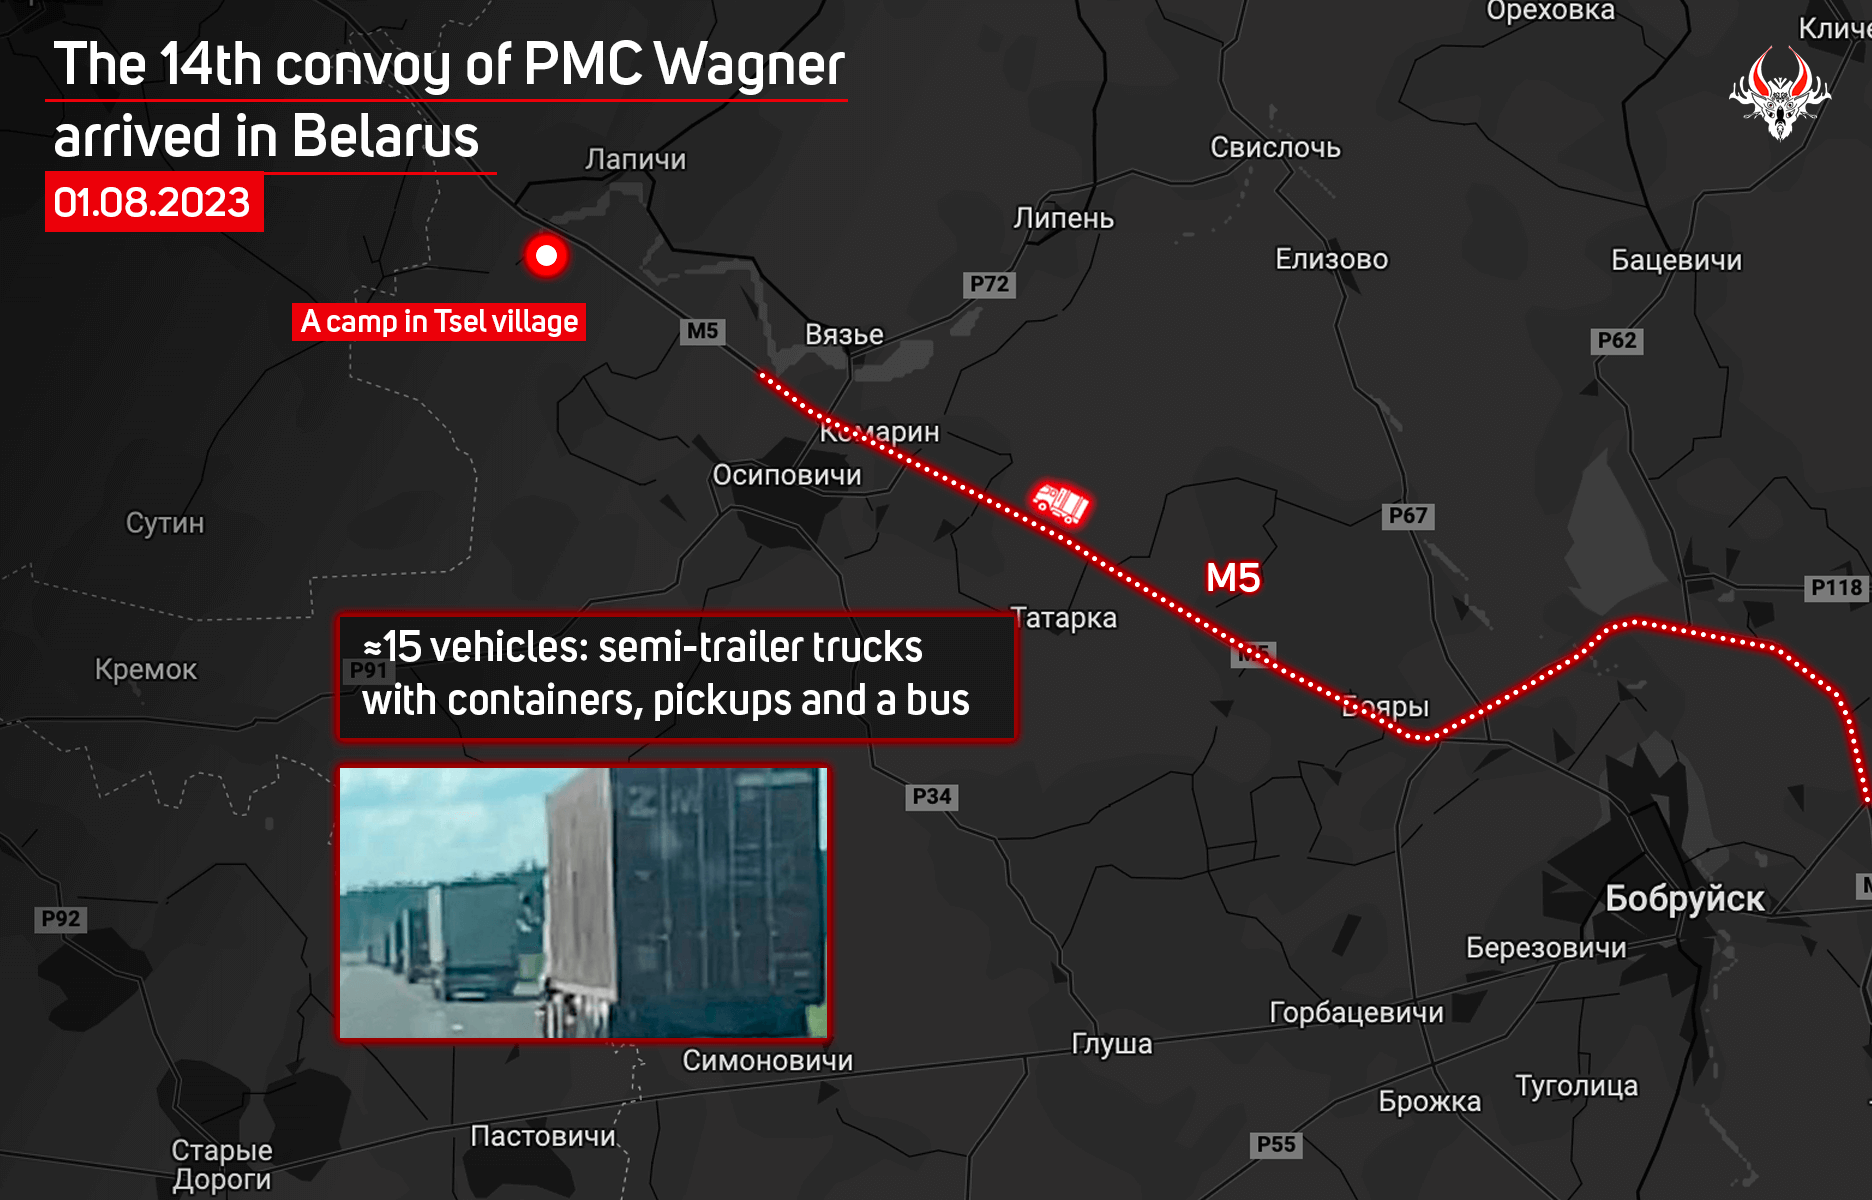 The 14th convoy of PMC Wagner